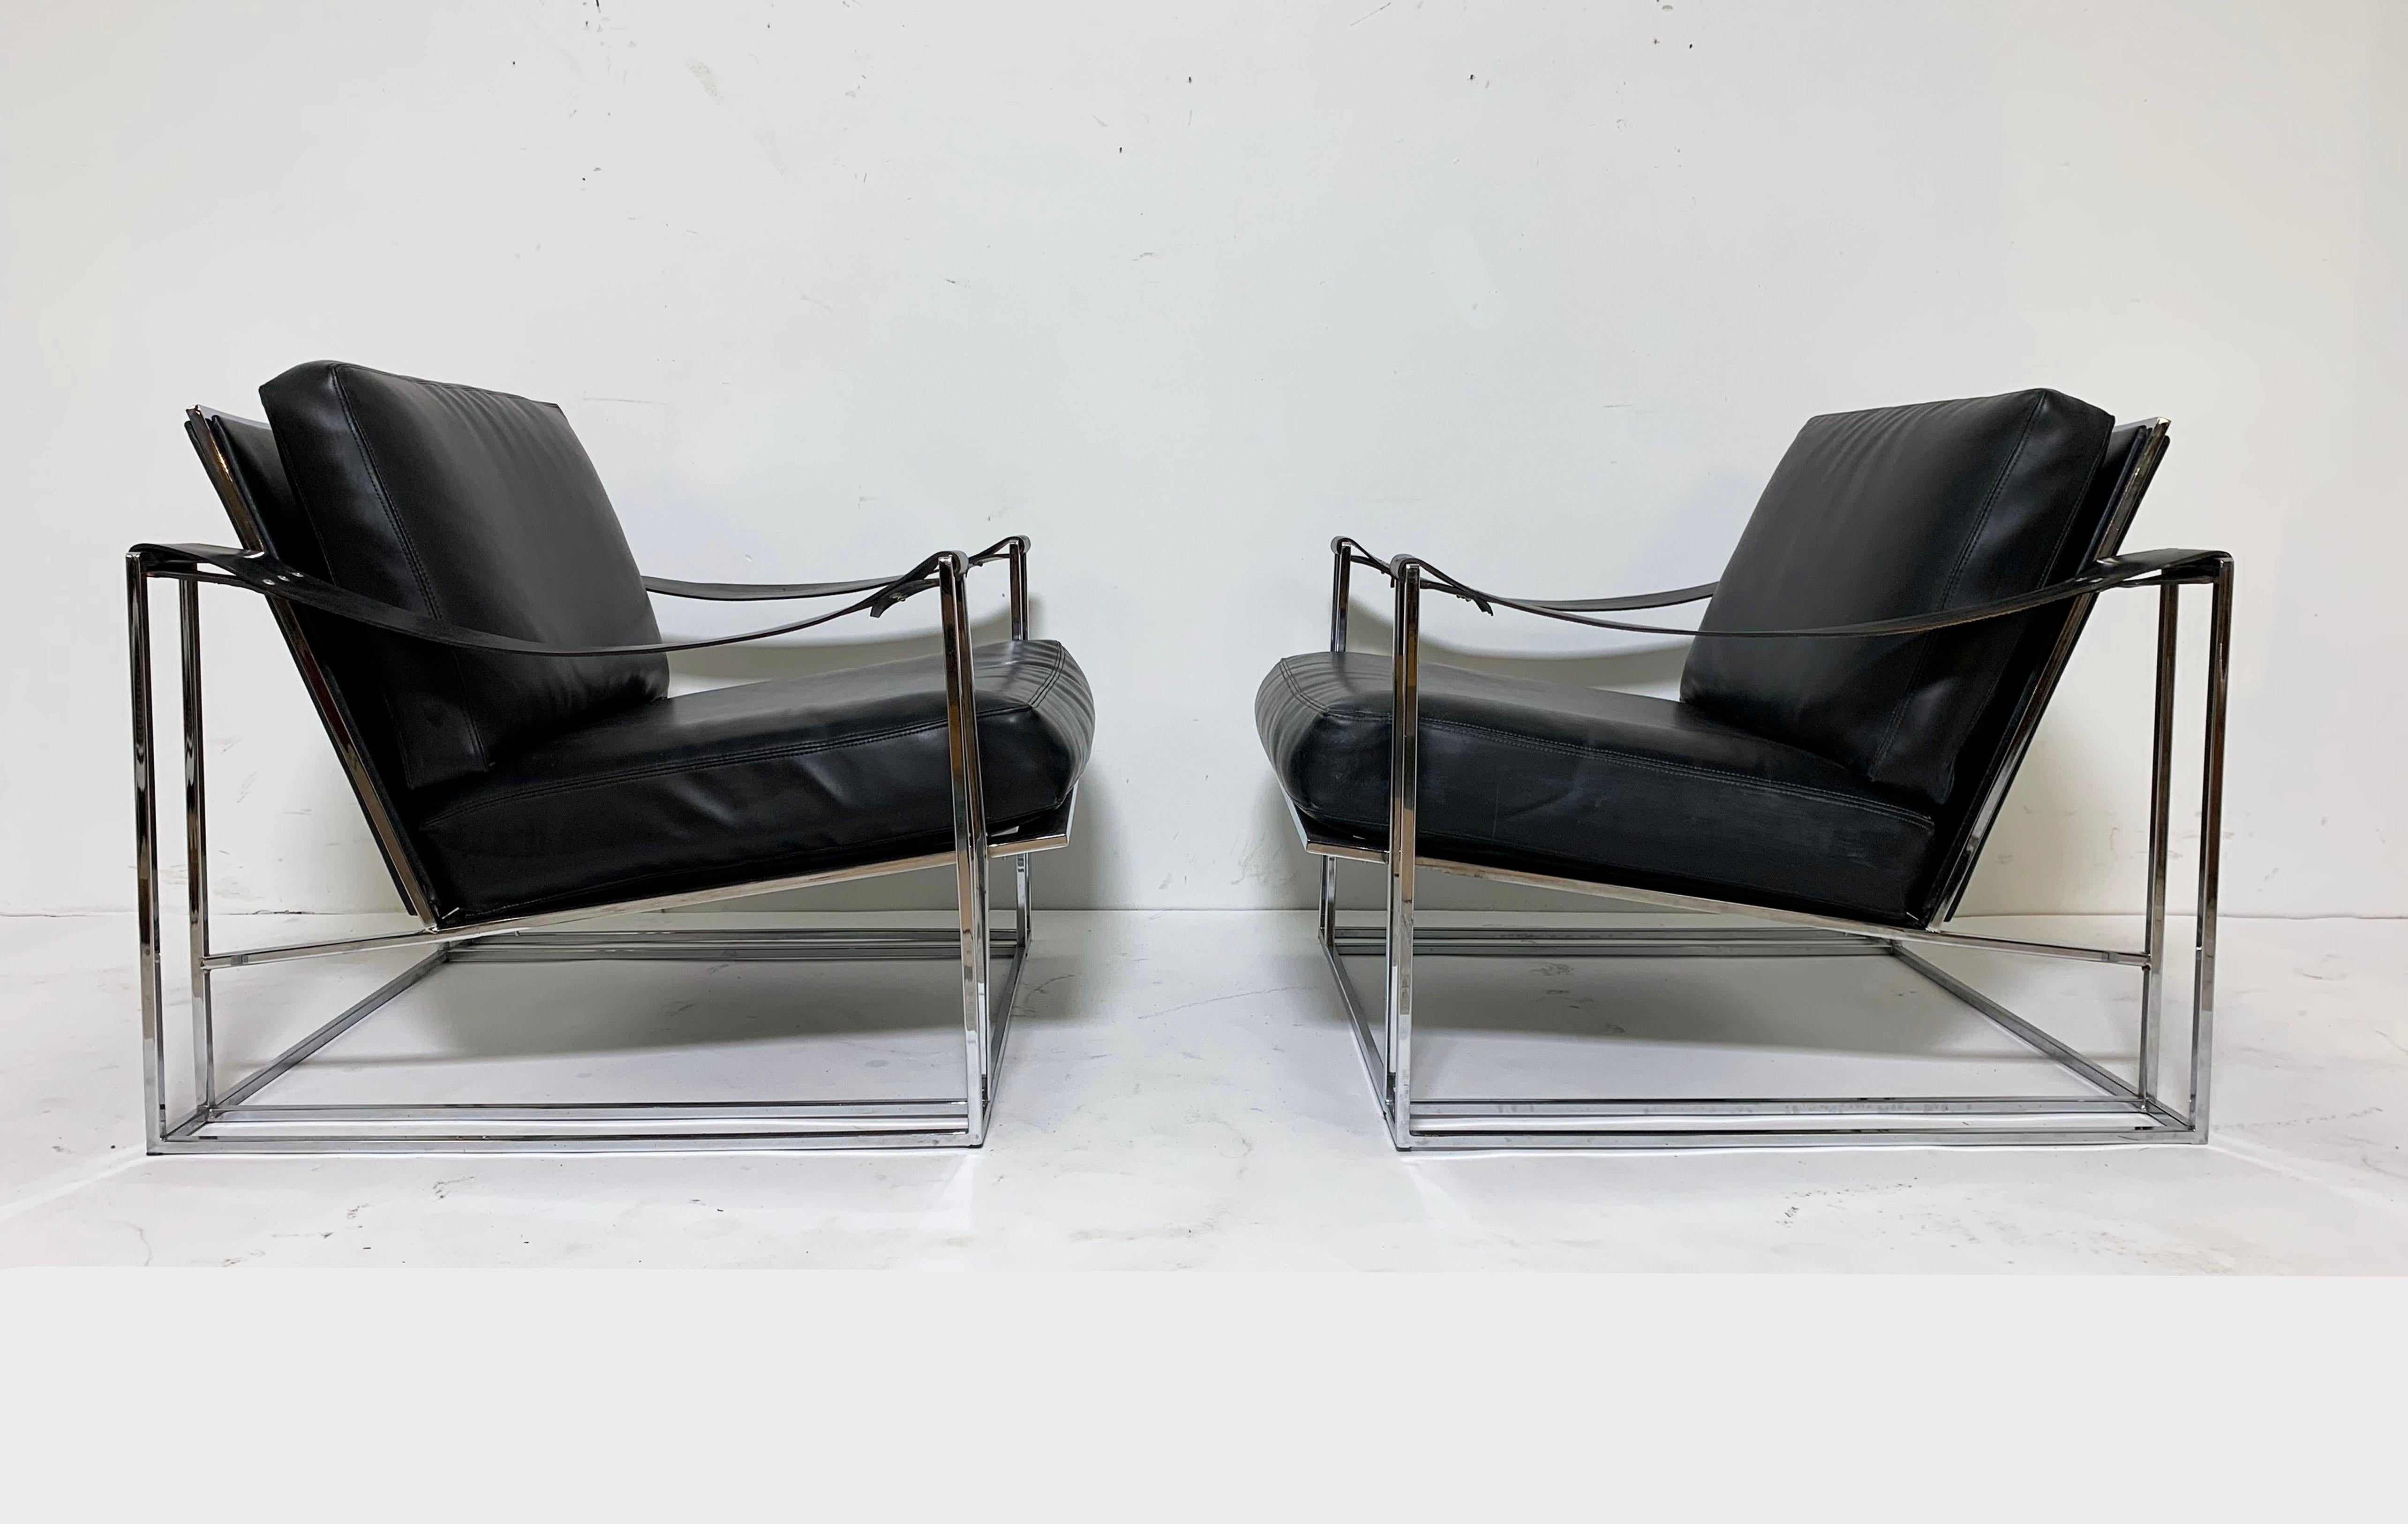 A pair of lounge chairs by Milo Baughman for Thayer Coggin, circa 1972. This fairly rare set, model #1233, is from the offices of the American architect Ben Thompson, who along with Walter Gropius was a founding member of the important postwar firm